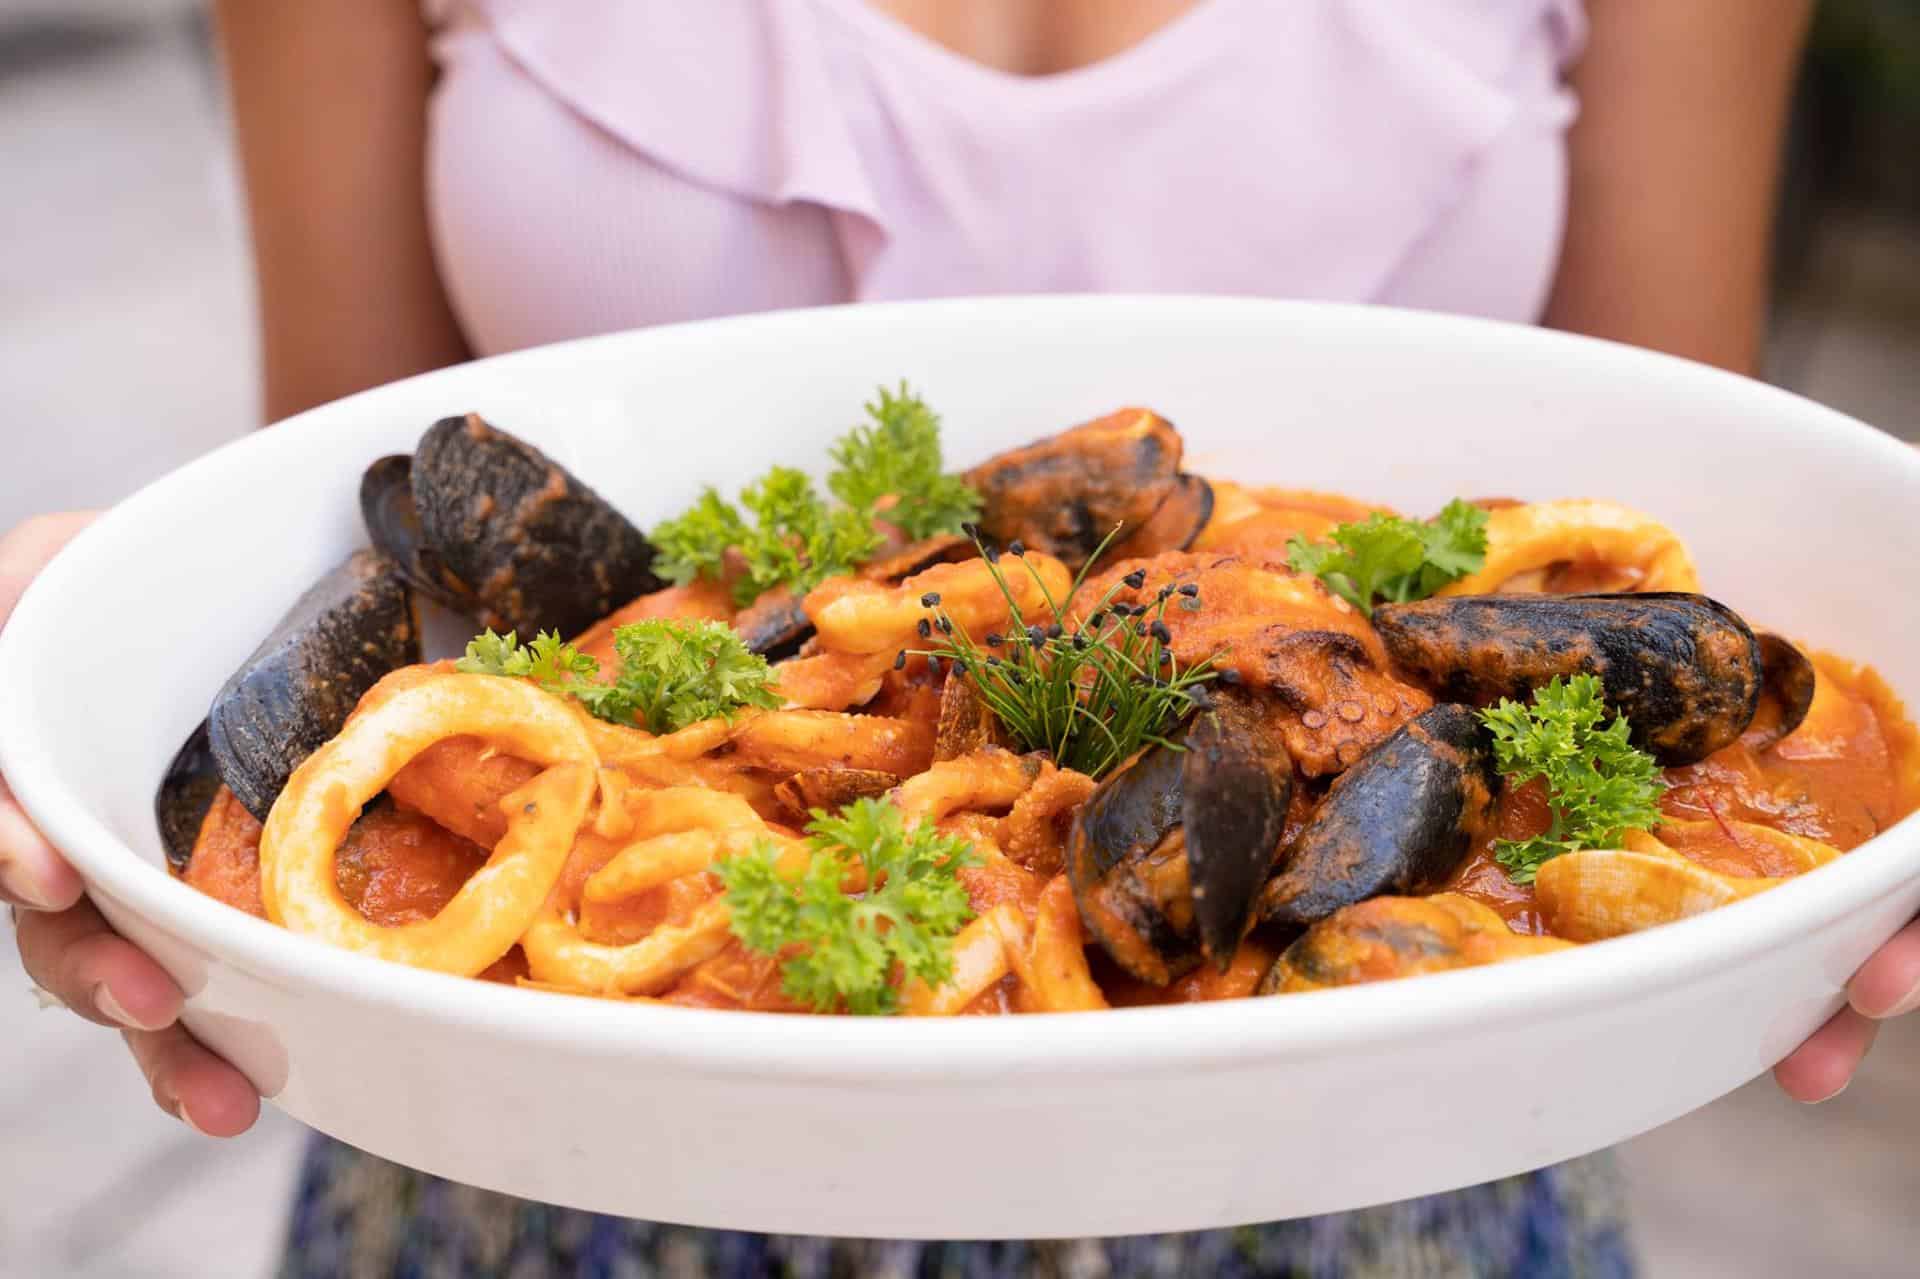 One of the seafood dishes at Ristorante Borgo Antico with mussels and clams, one of the best restaurants in Bari